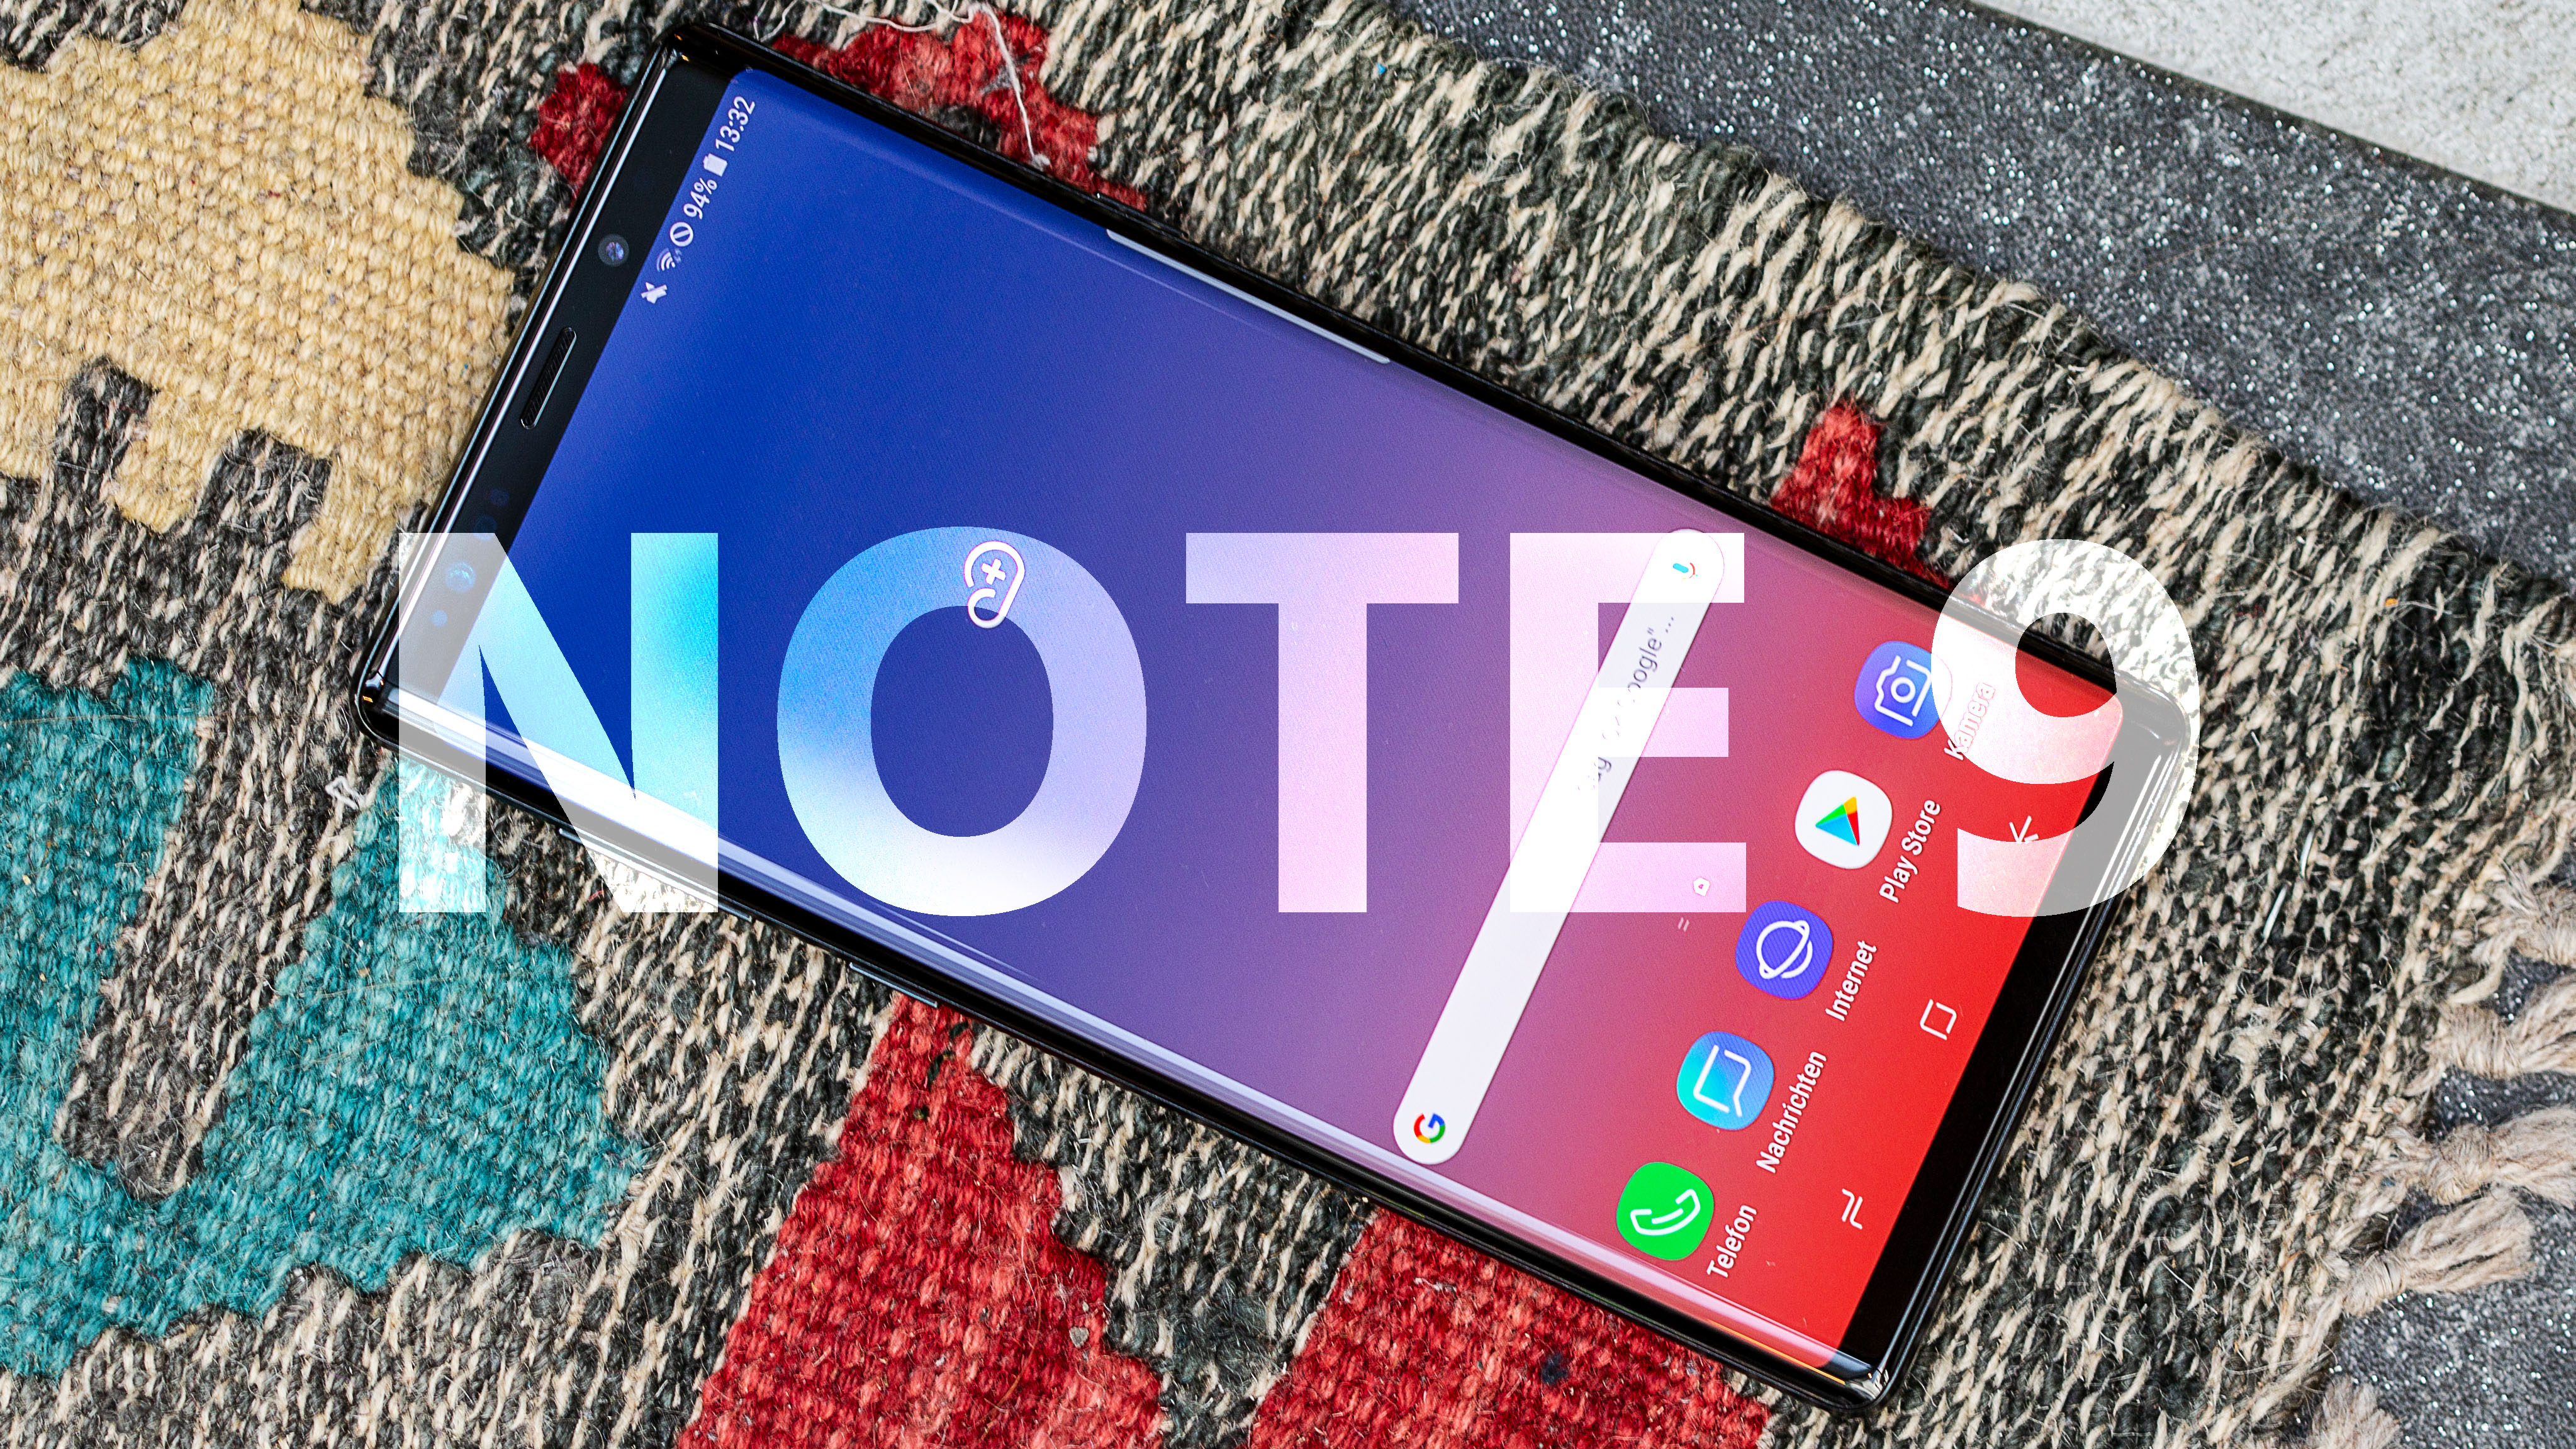 Samsung Galaxy Note 9 Android update brings all but night mode NextPit